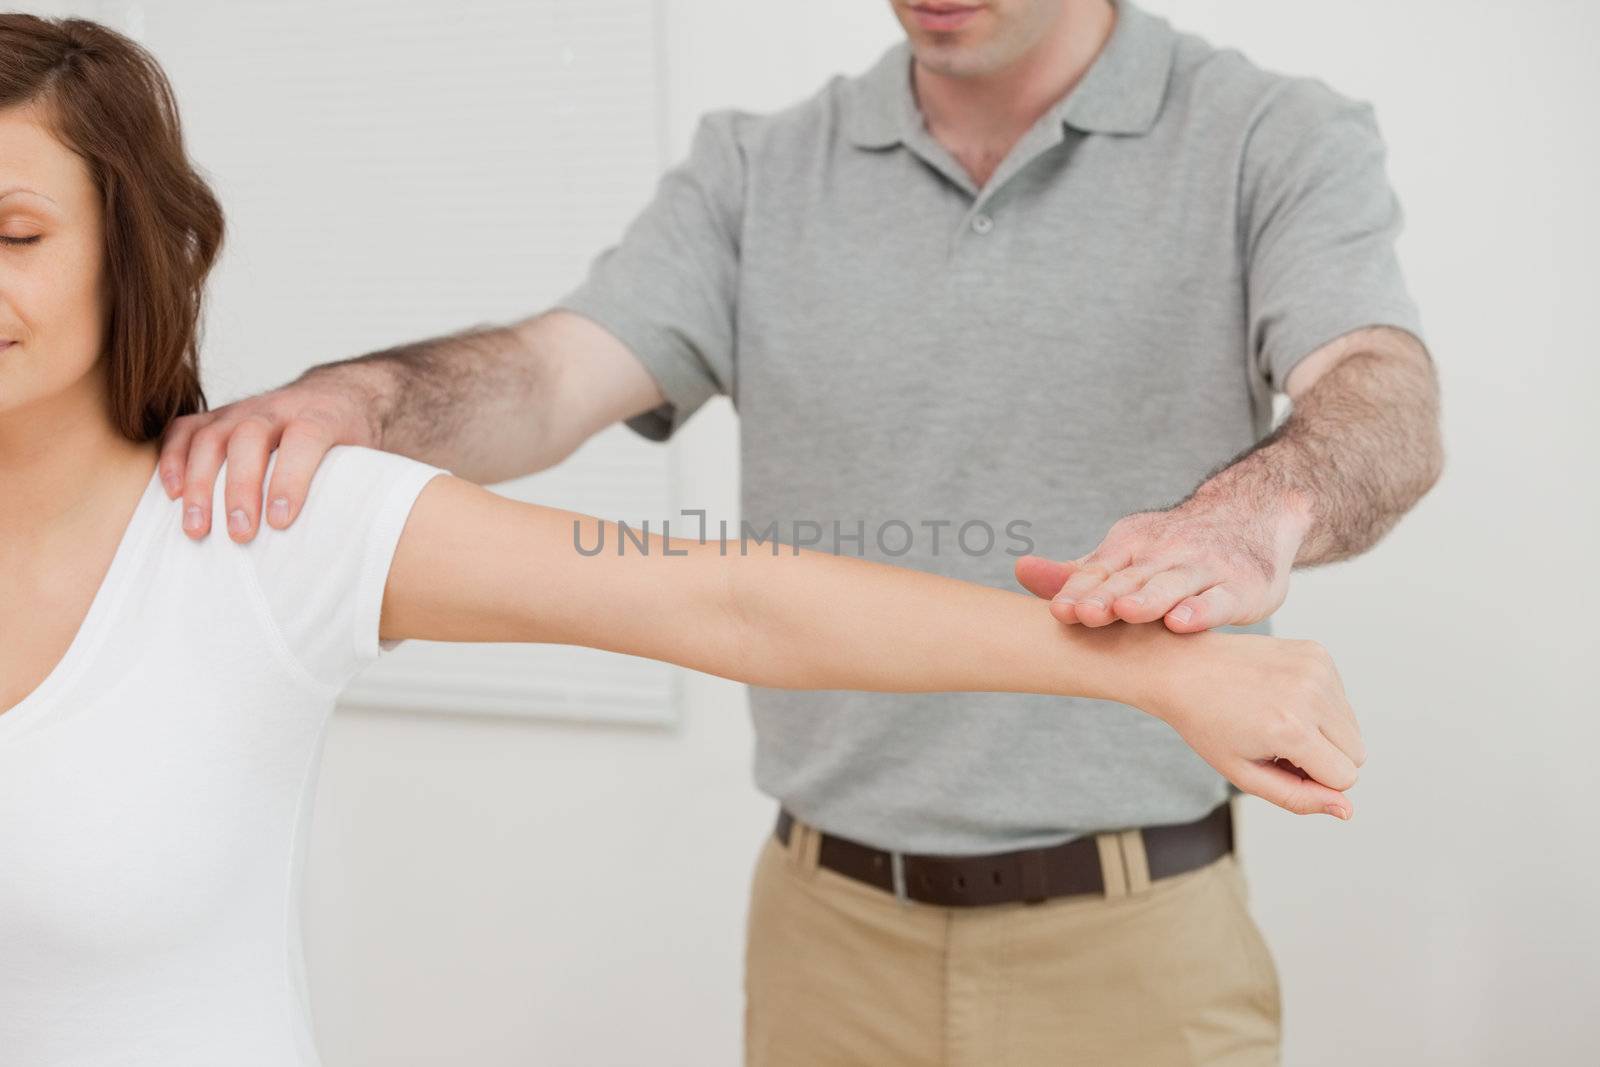 Woman sitting while a doctor is examining her arm in a room